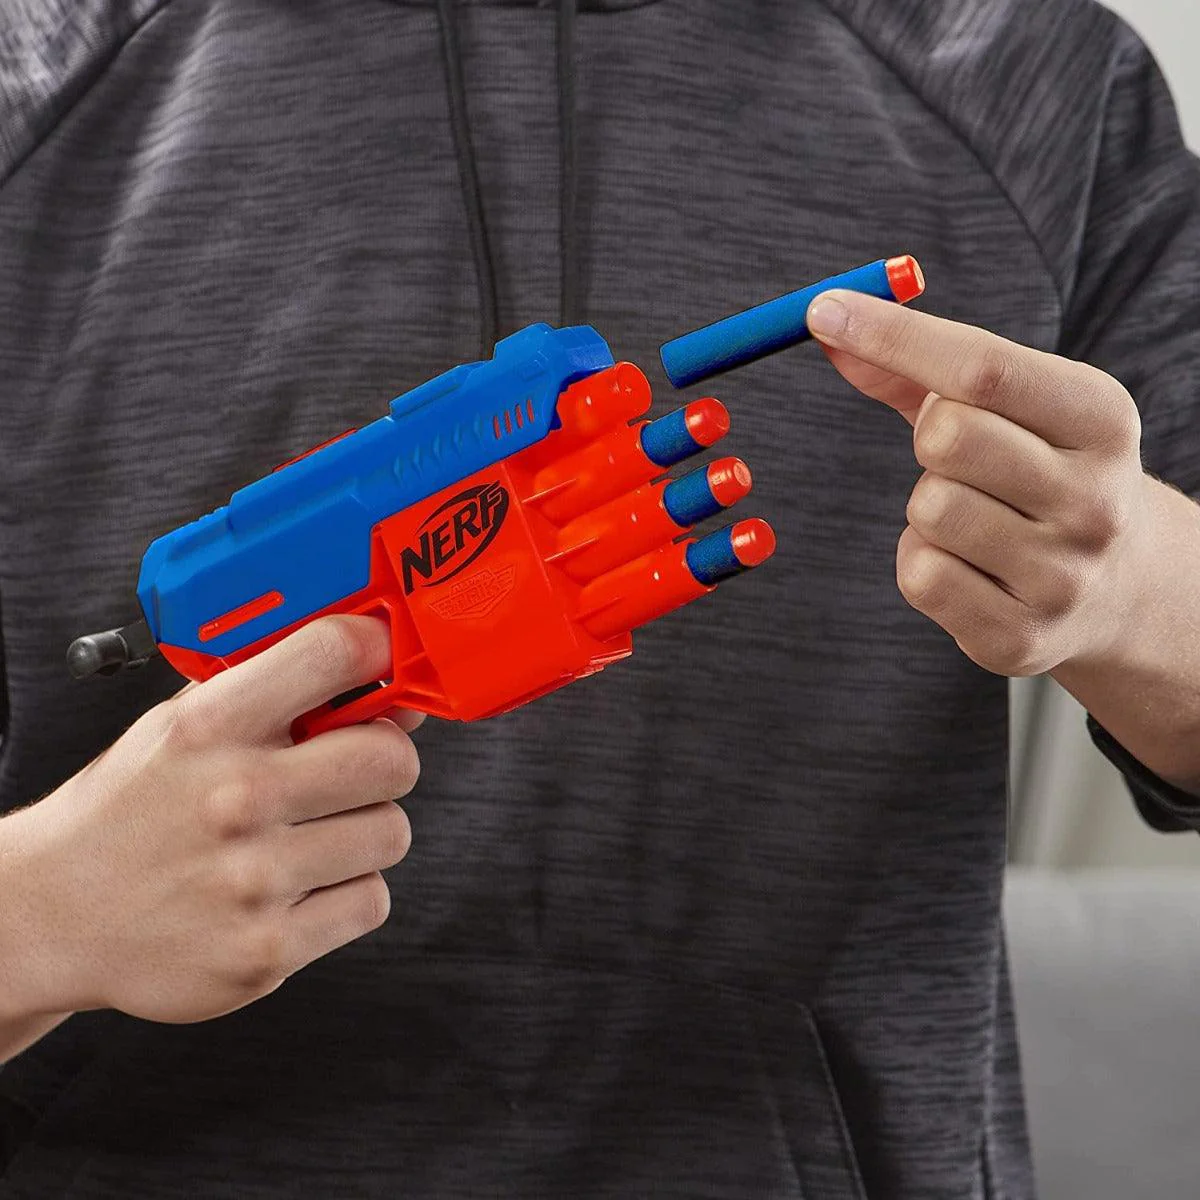 nerf_alpha_strike_fang_qs-4_blaster_4-dart_blasting_fire_4_darts_in_a_row_10_official_nerf_elite_darts_easy_load-prime-fire_2